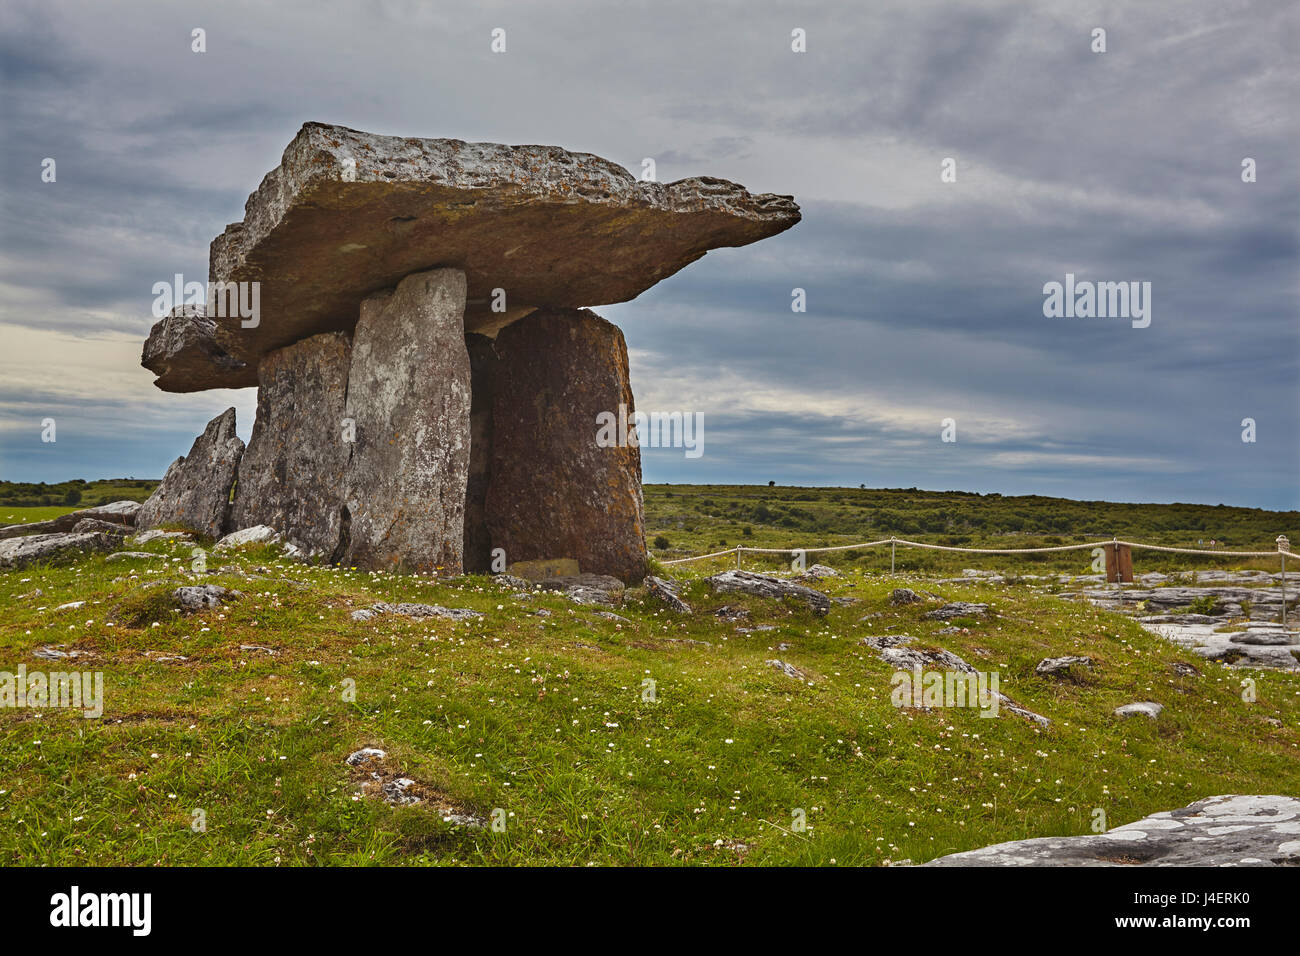 The Poulnabrone dolmen, prehistoric slab burial chamber, The Burren, County Clare, Munster, Republic of Ireland, Europe Stock Photo